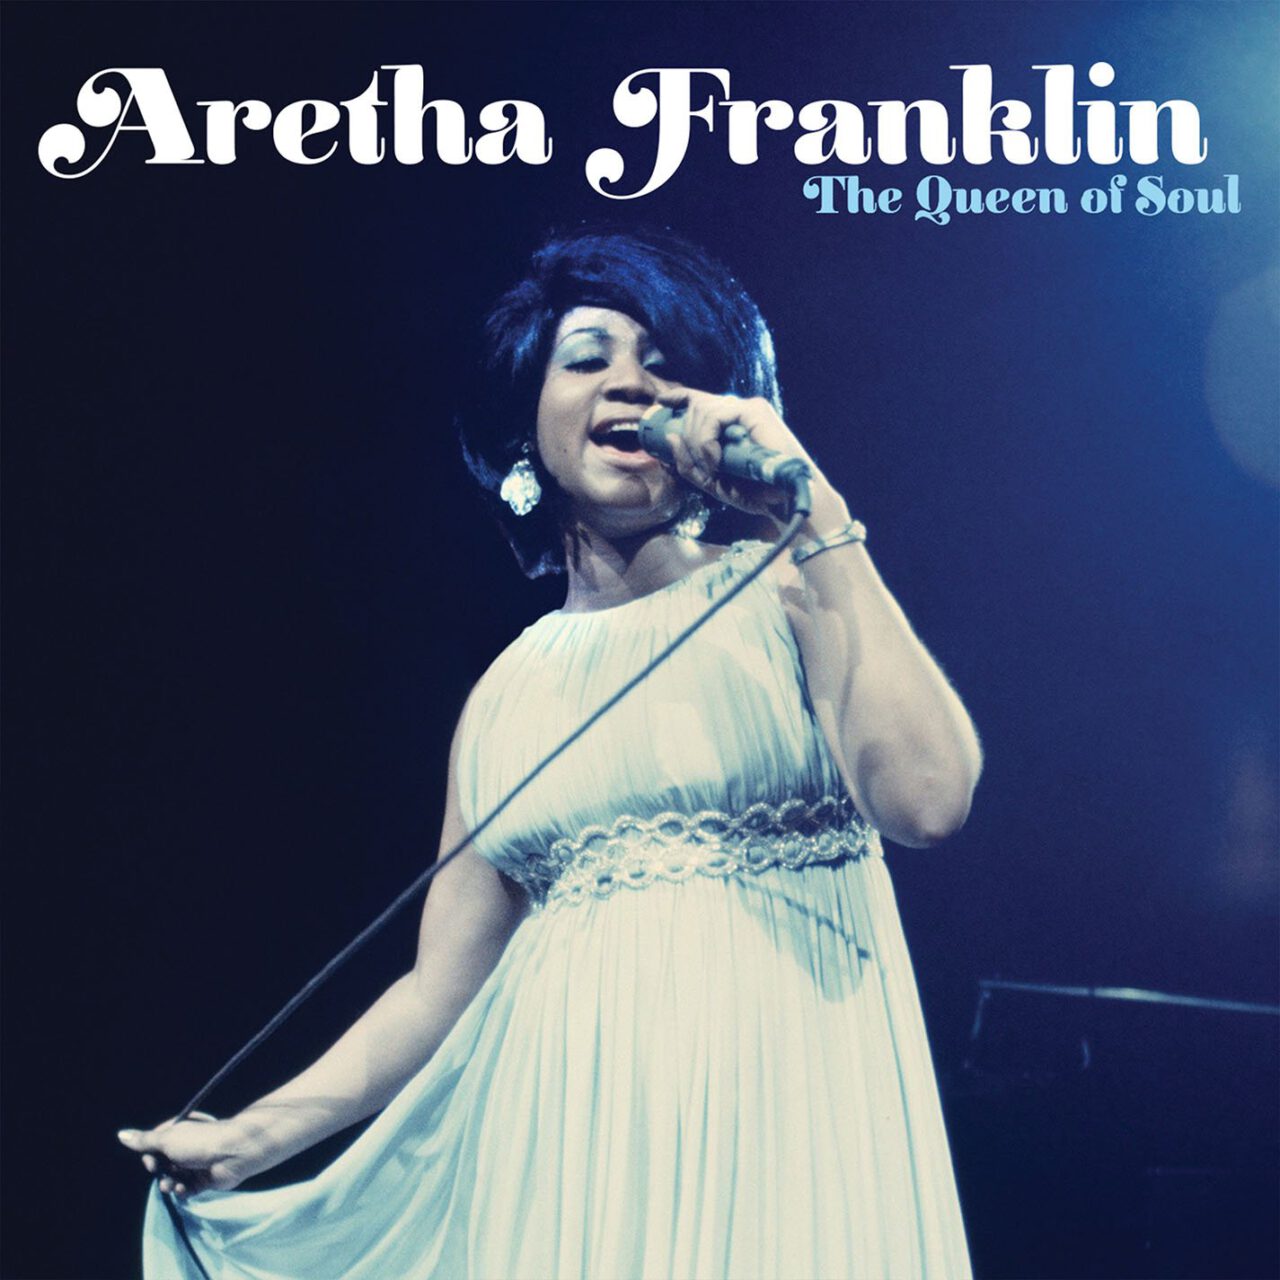 Aretha Franklin – The Queen of Soul/Otis Redding – The King of Soul